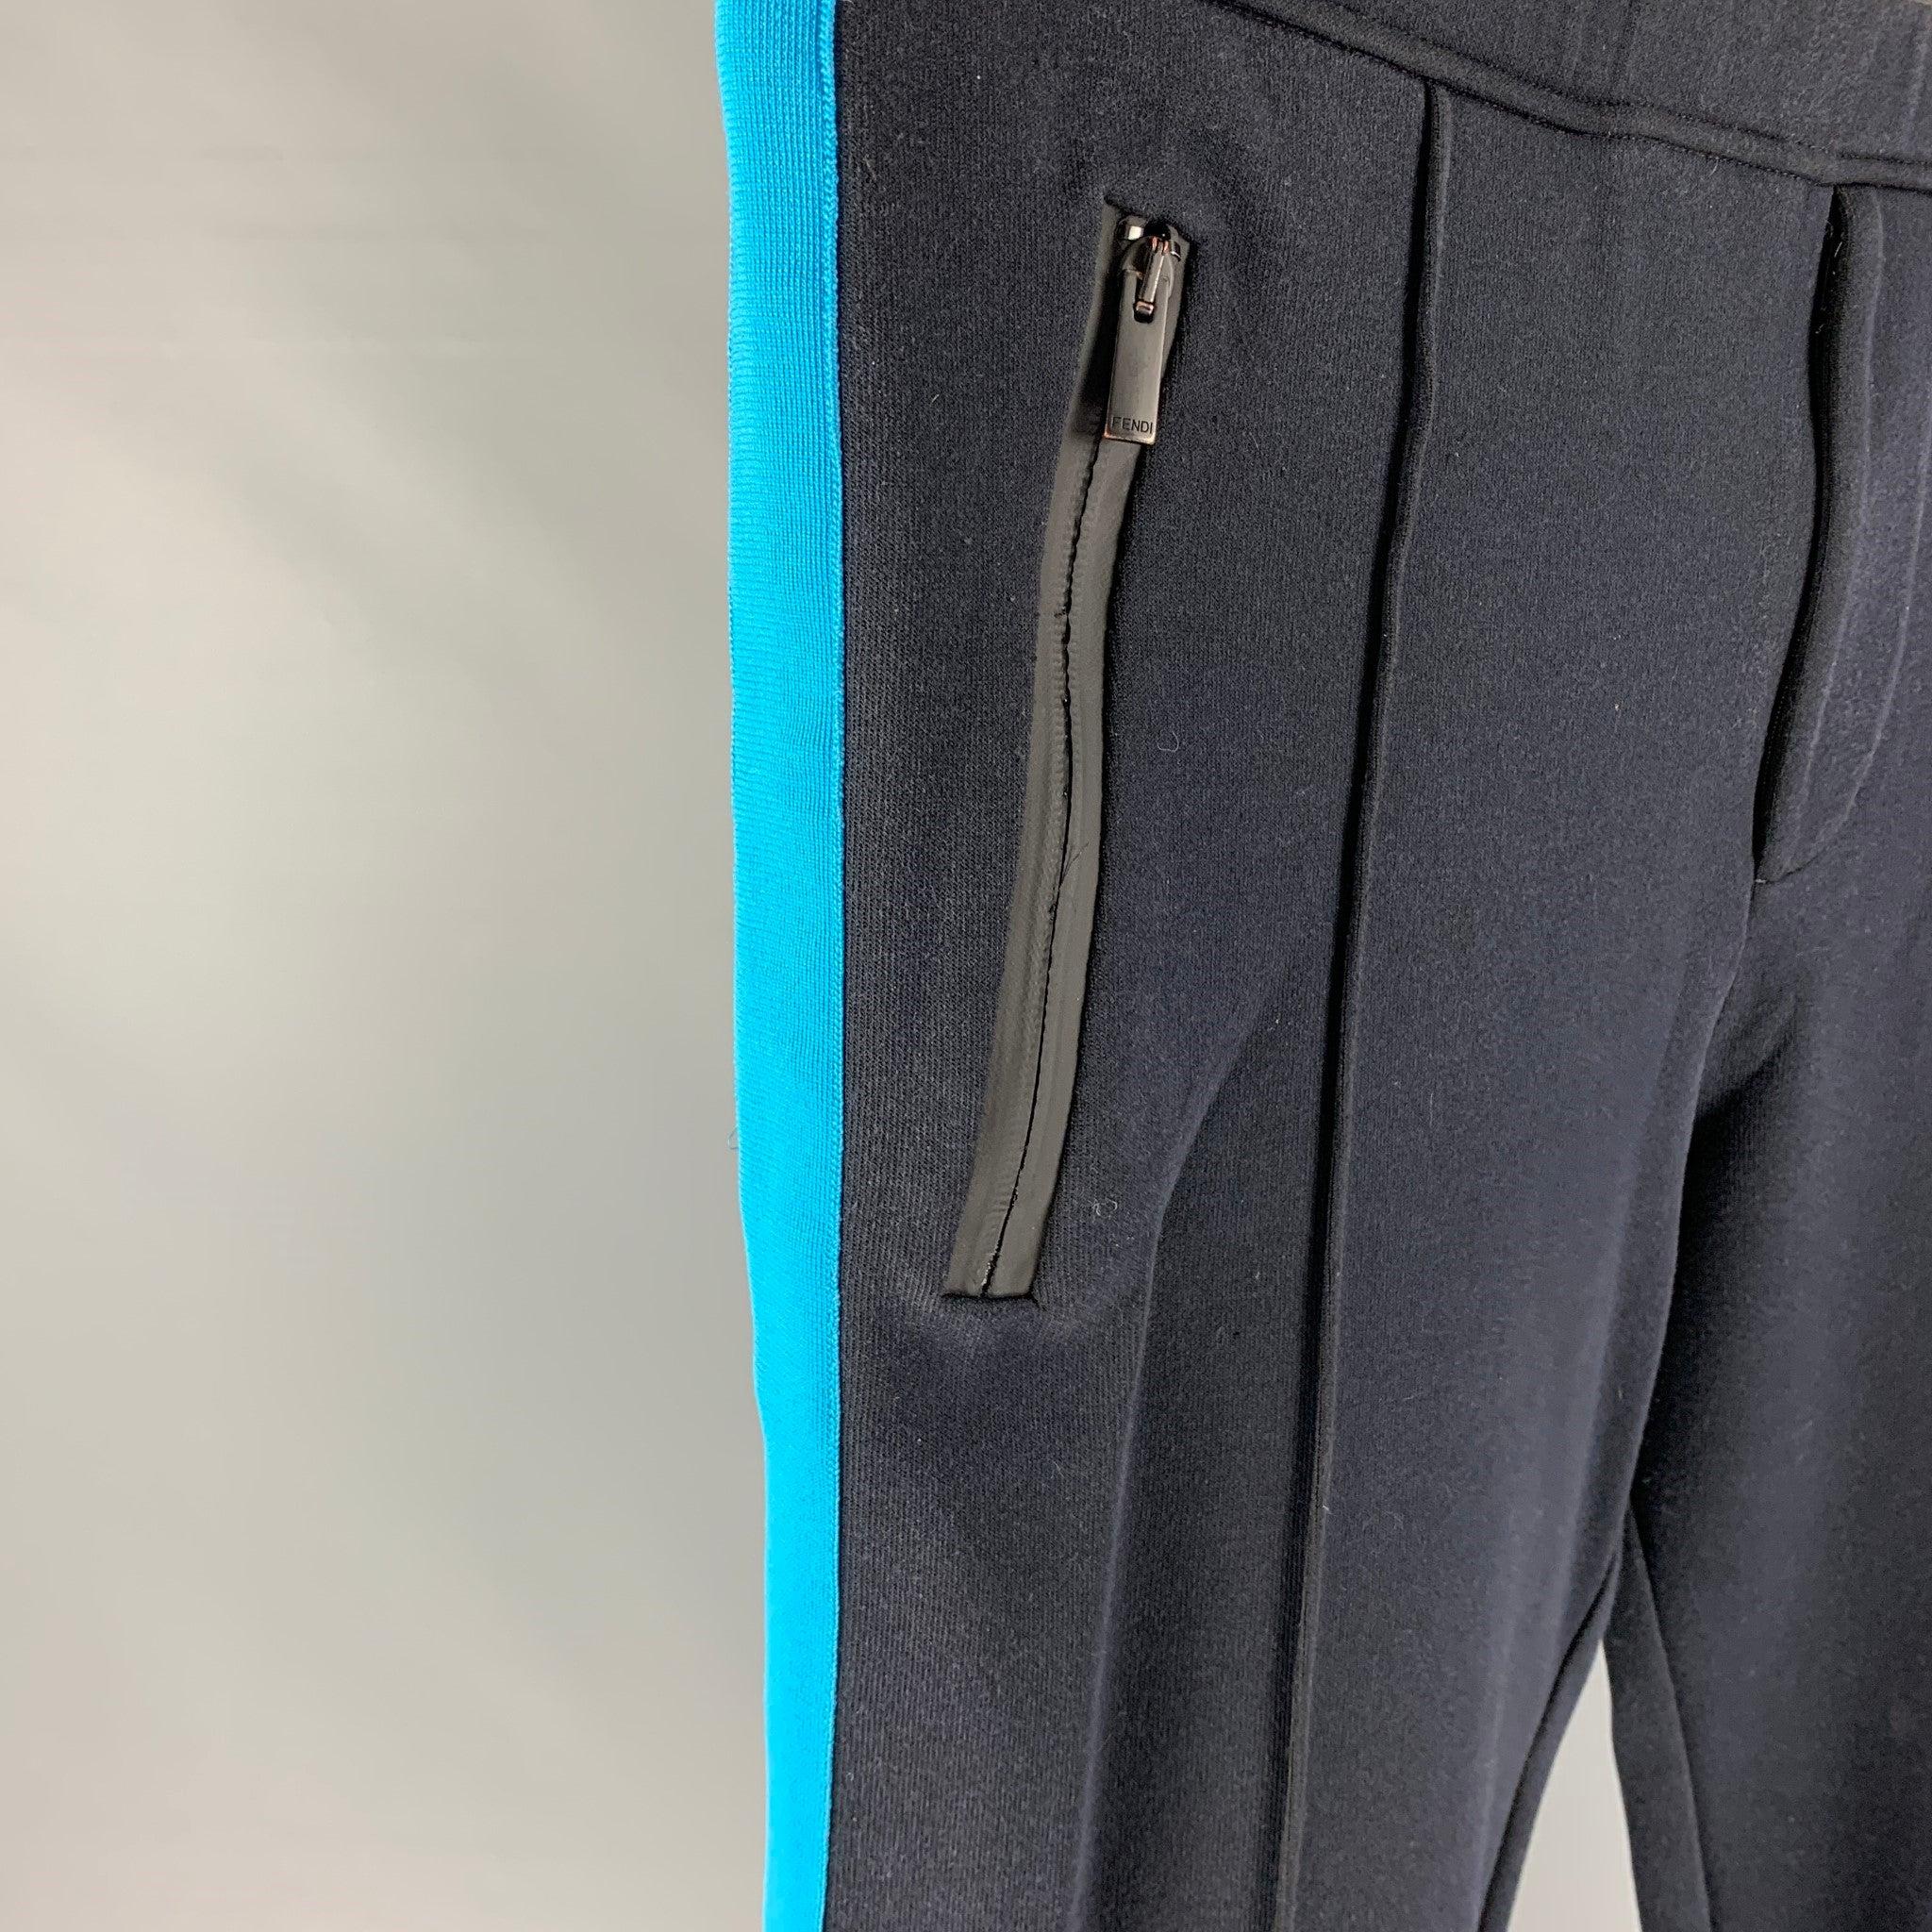 FENDI sweatpants comes in a navy cotton blend with a blue stripe detail featuring a front pleat, zipper pockets, elastic waist, and a zip fly closure. Made in Italy.
Very Good
Pre-Owned Condition. 

Marked:   52 

Measurements: 
  Waist: 36 inches 